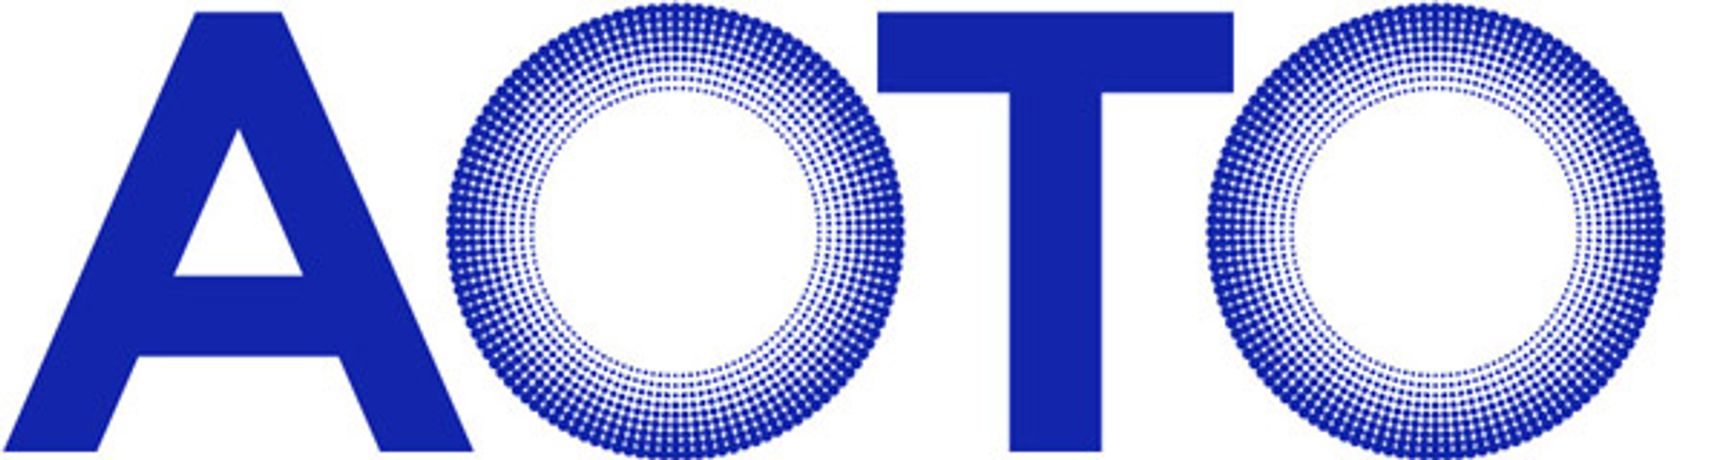 AOTO Officially Introduces its New Visual Identity-0